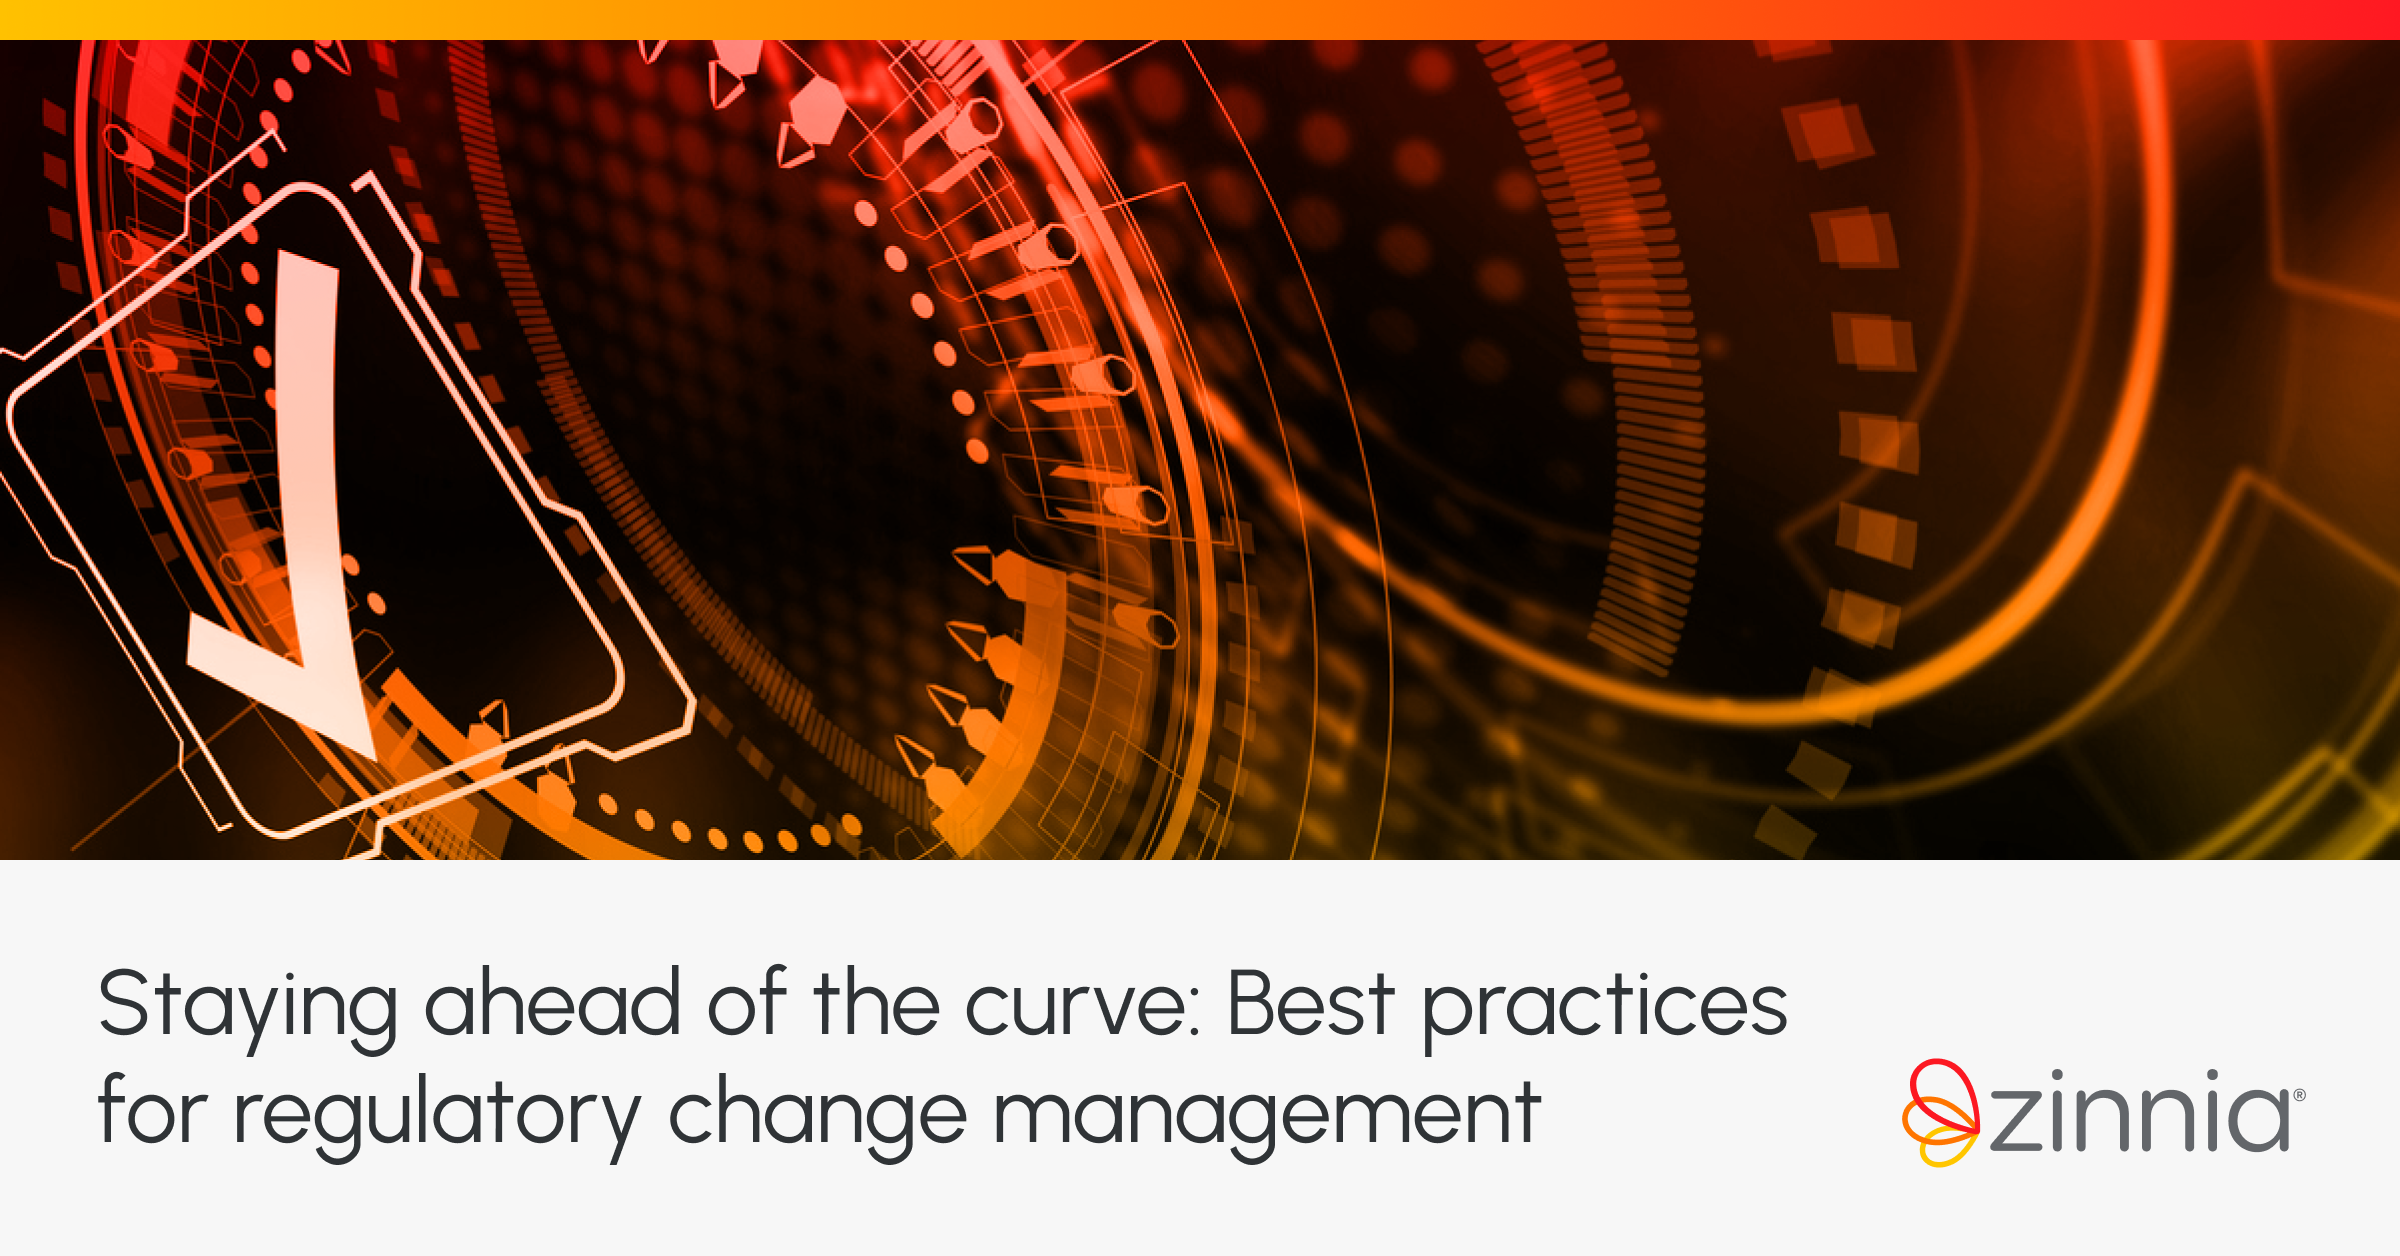 Imagine with an abstract background of orange and red digital elements, featuring the title 'Staying ahead of the curve: Best practices for regulatory change management' and the Zinnia logo.